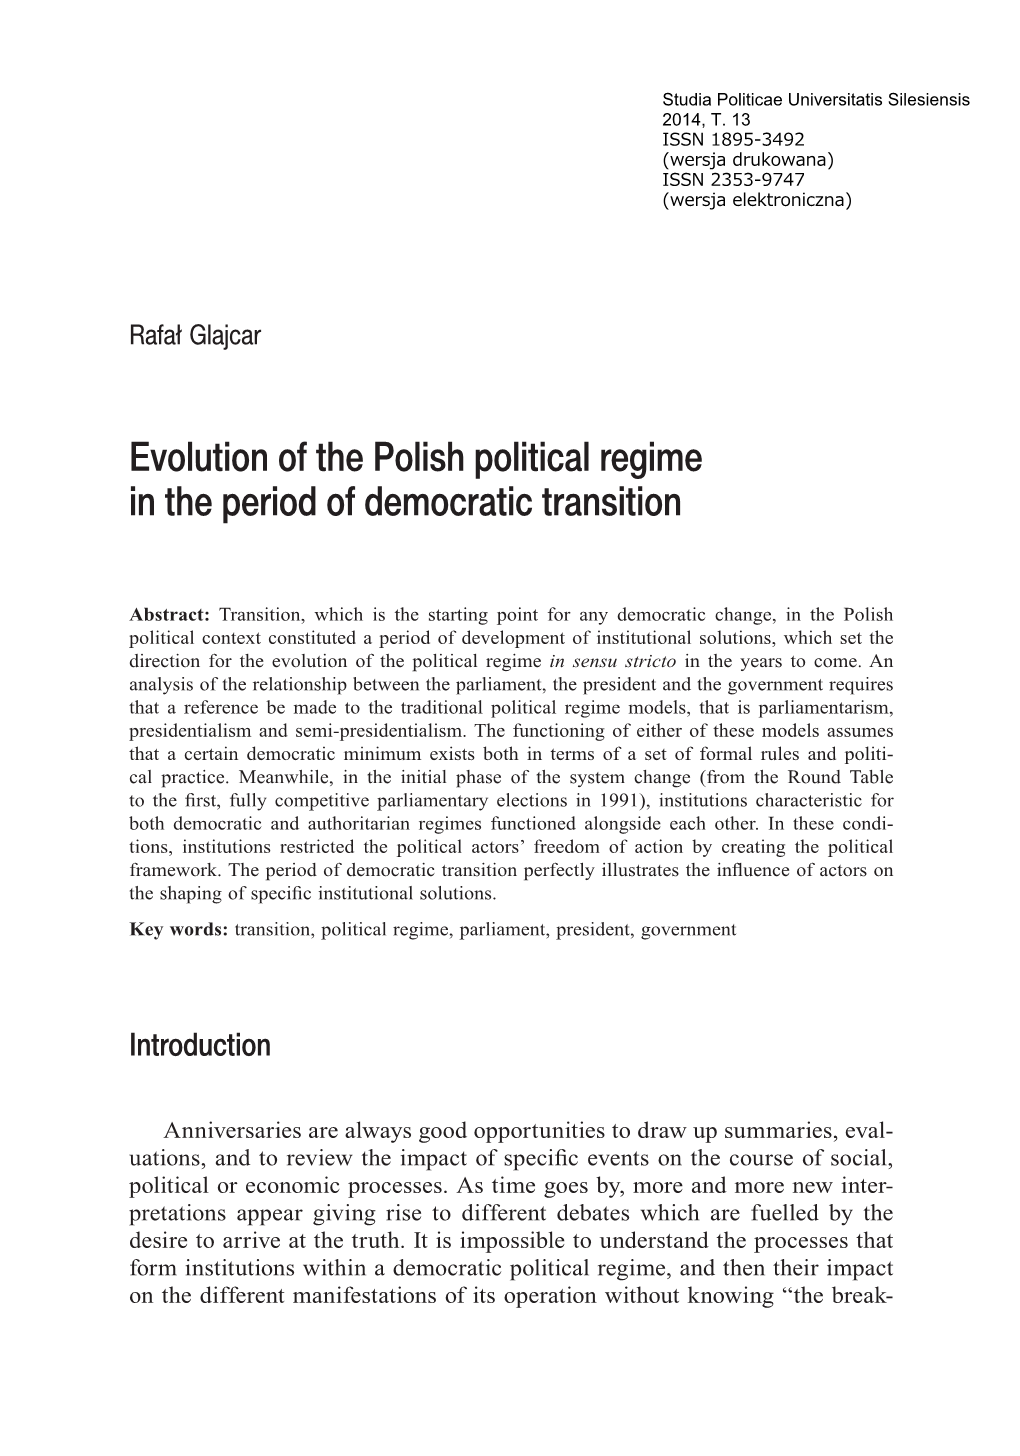 Evolution of the Polish Political Regime in the Period of Democratic Transition